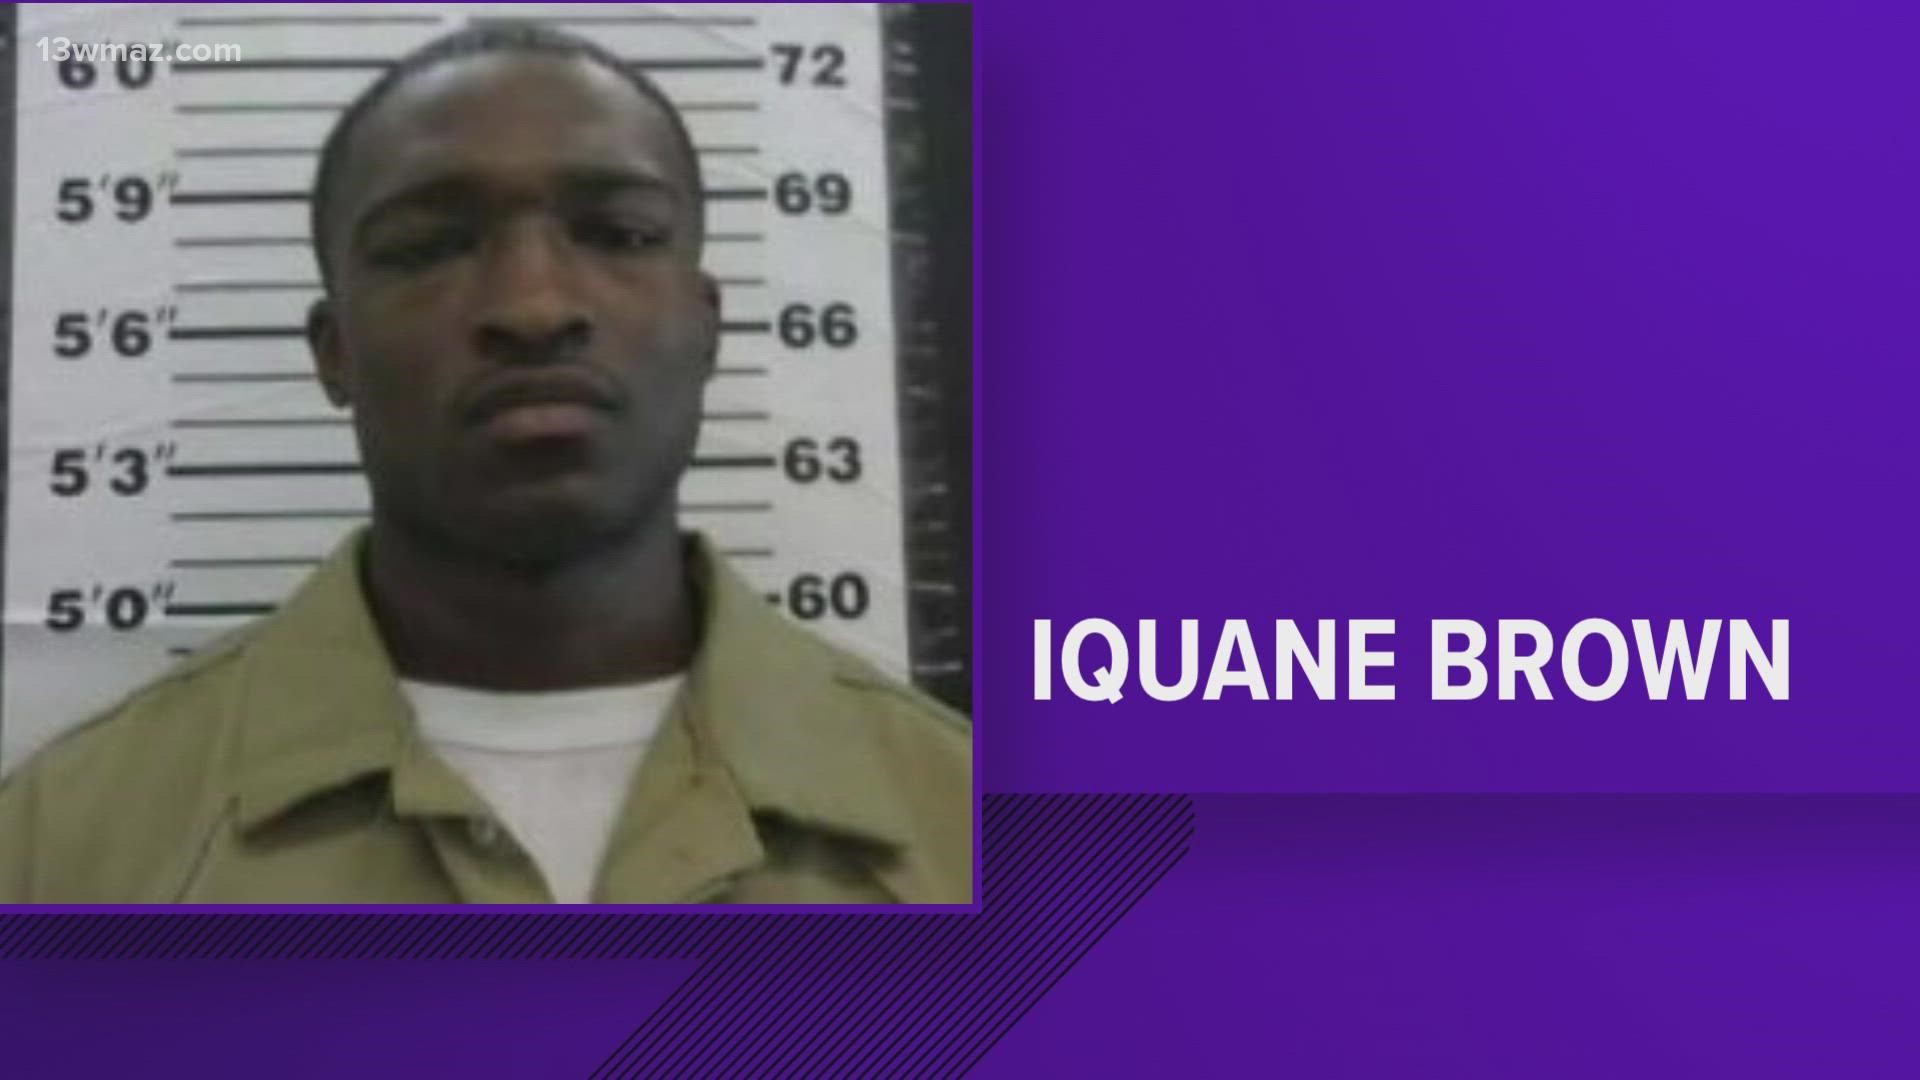 They issued a statewide lookout for 28-year-old Iquane Brown who walked away from the facility in Macon.